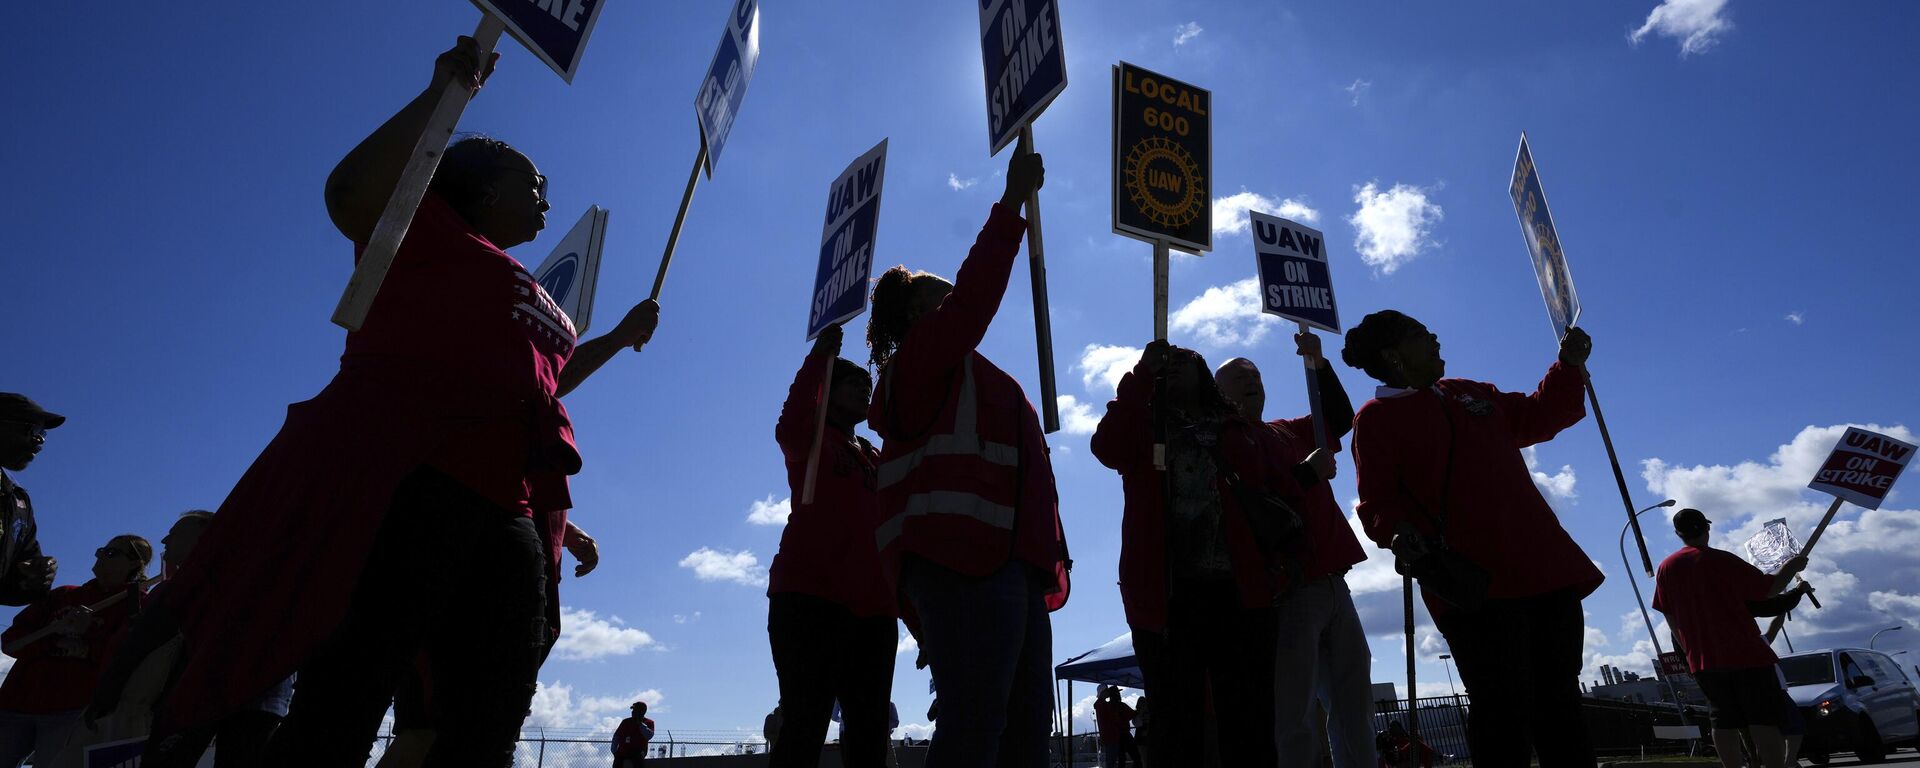 United Auto Workers members walk the picket line at the Ford Michigan Assembly Plant in Wayne, Mich., Monday, Sept. 18, 2023. So far the strike is limited to about 13,000 workers at three factories — one each at GM, Ford and Stellantis.  - Sputnik International, 1920, 20.09.2023